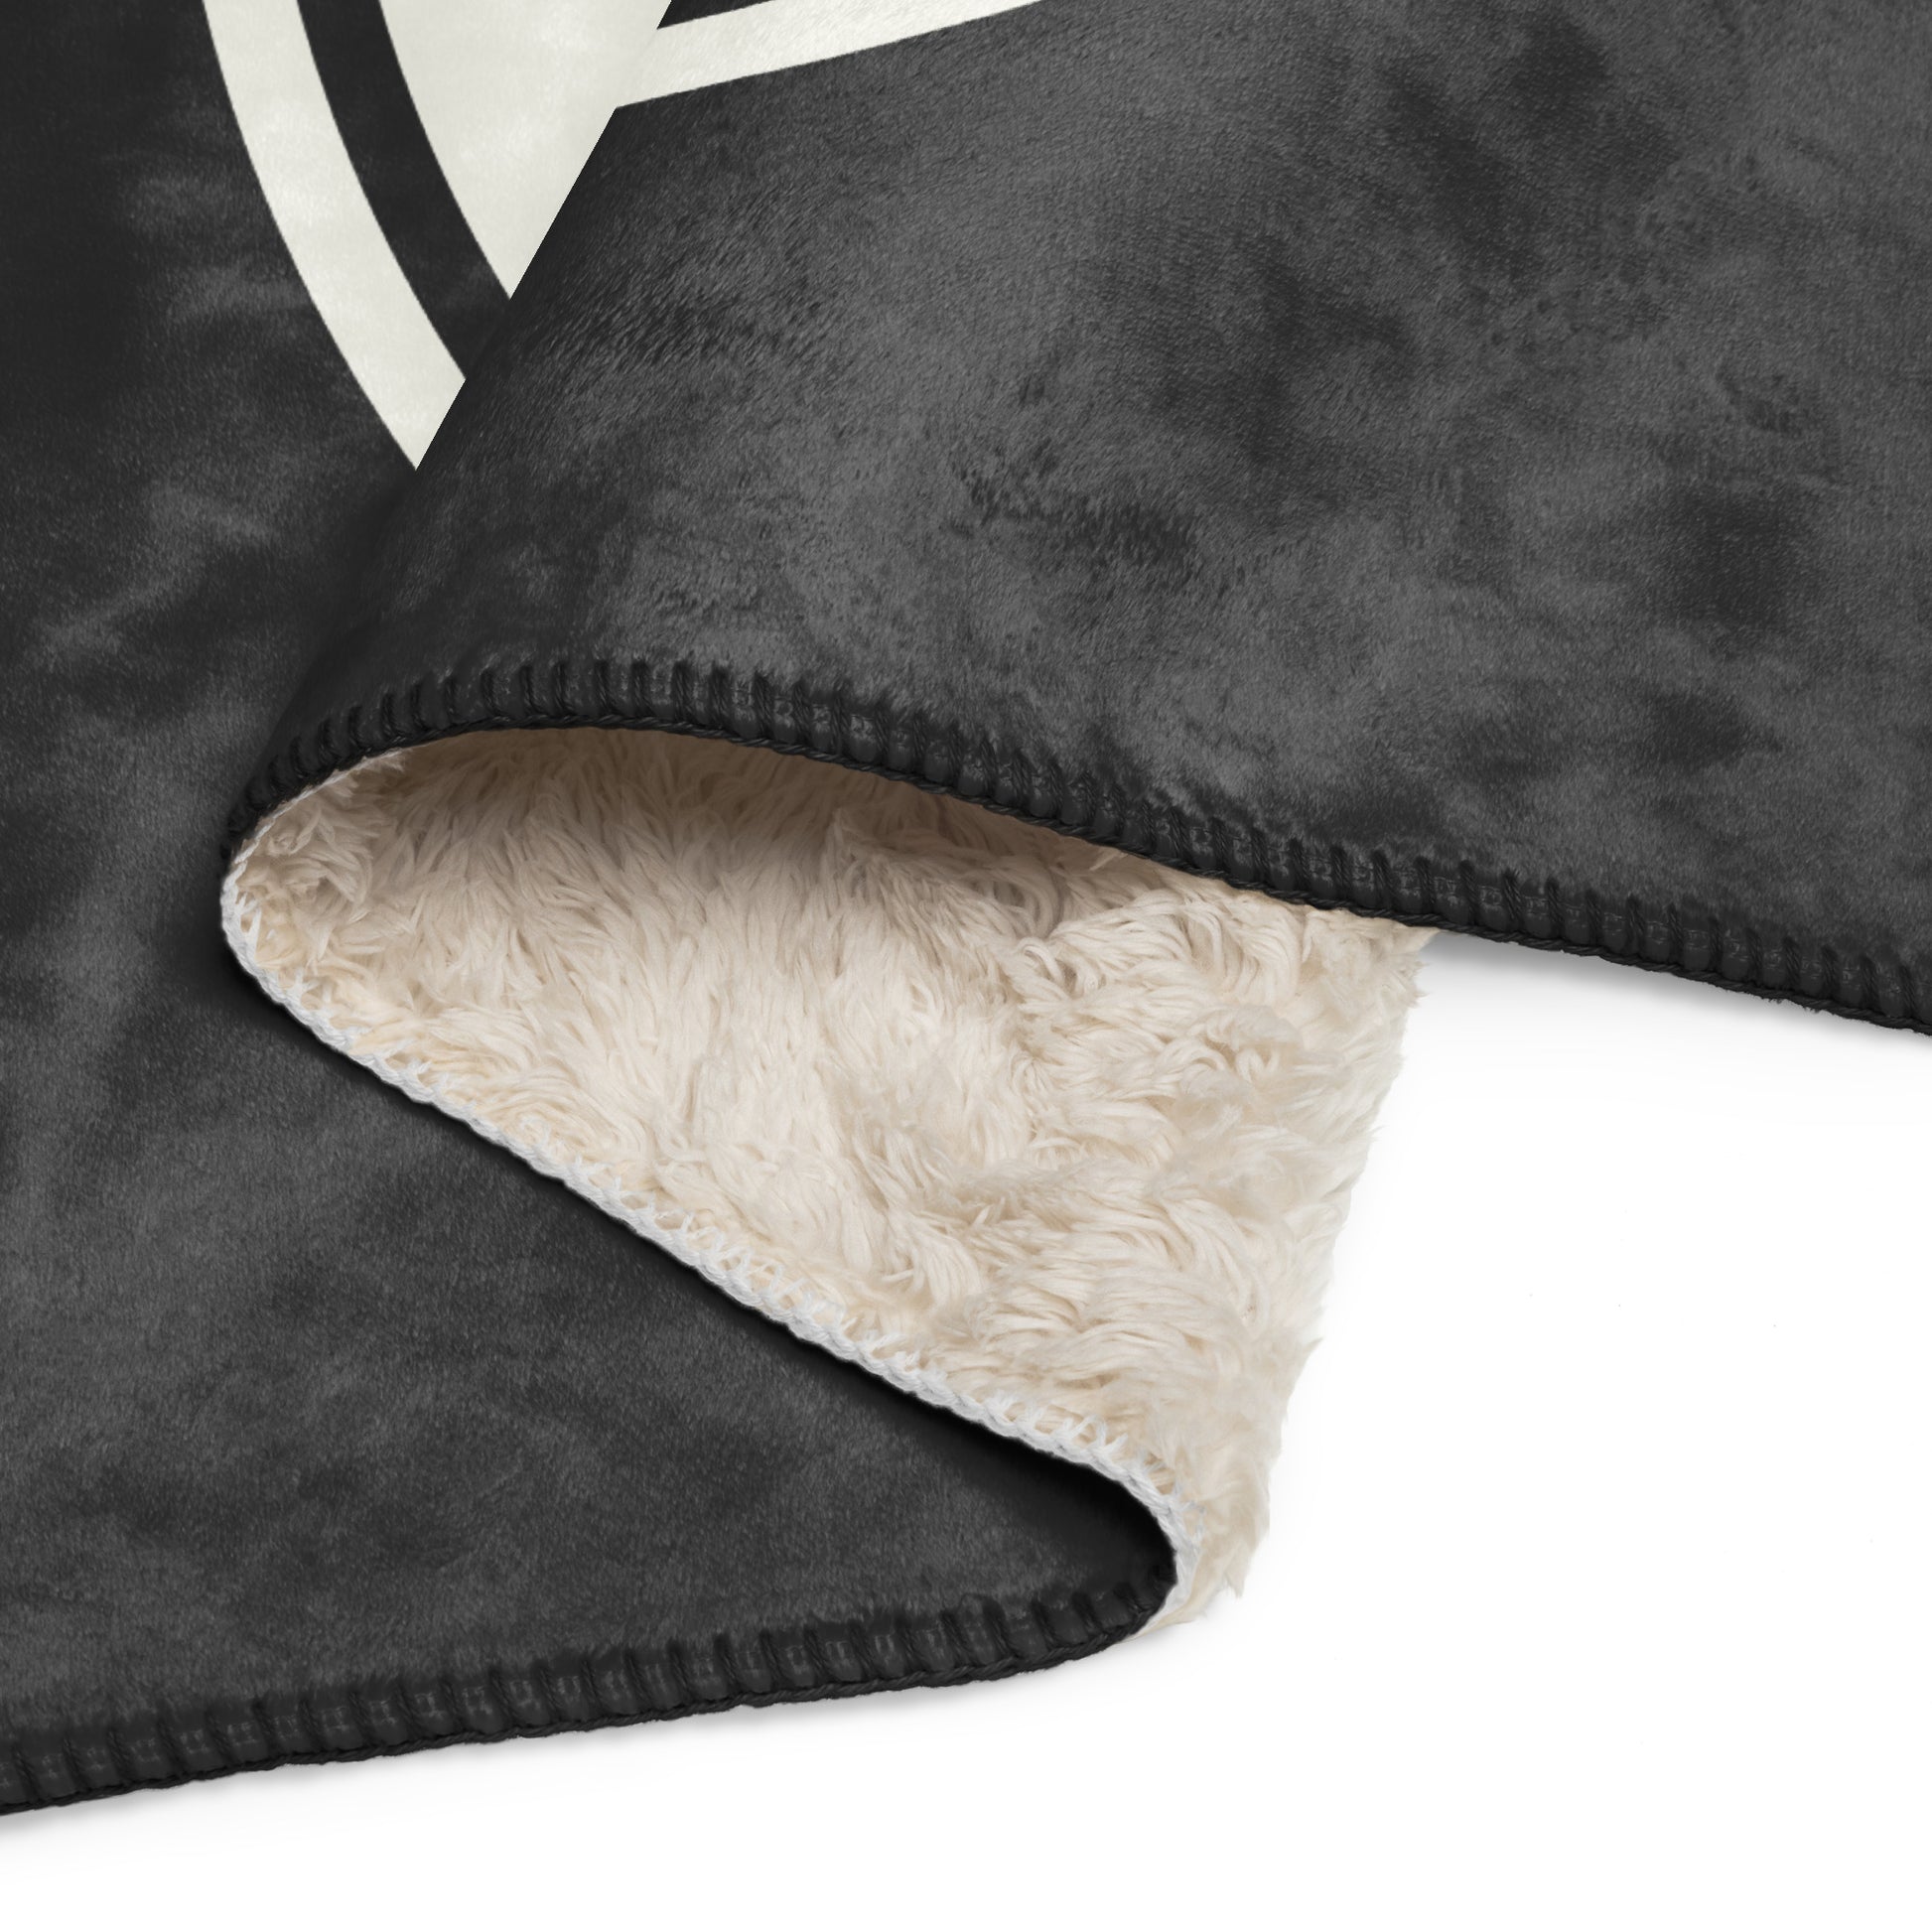 Unique Travel Gift Sherpa Blanket - White Oval • EZE Buenos Aires • YHM Designs - Image 08